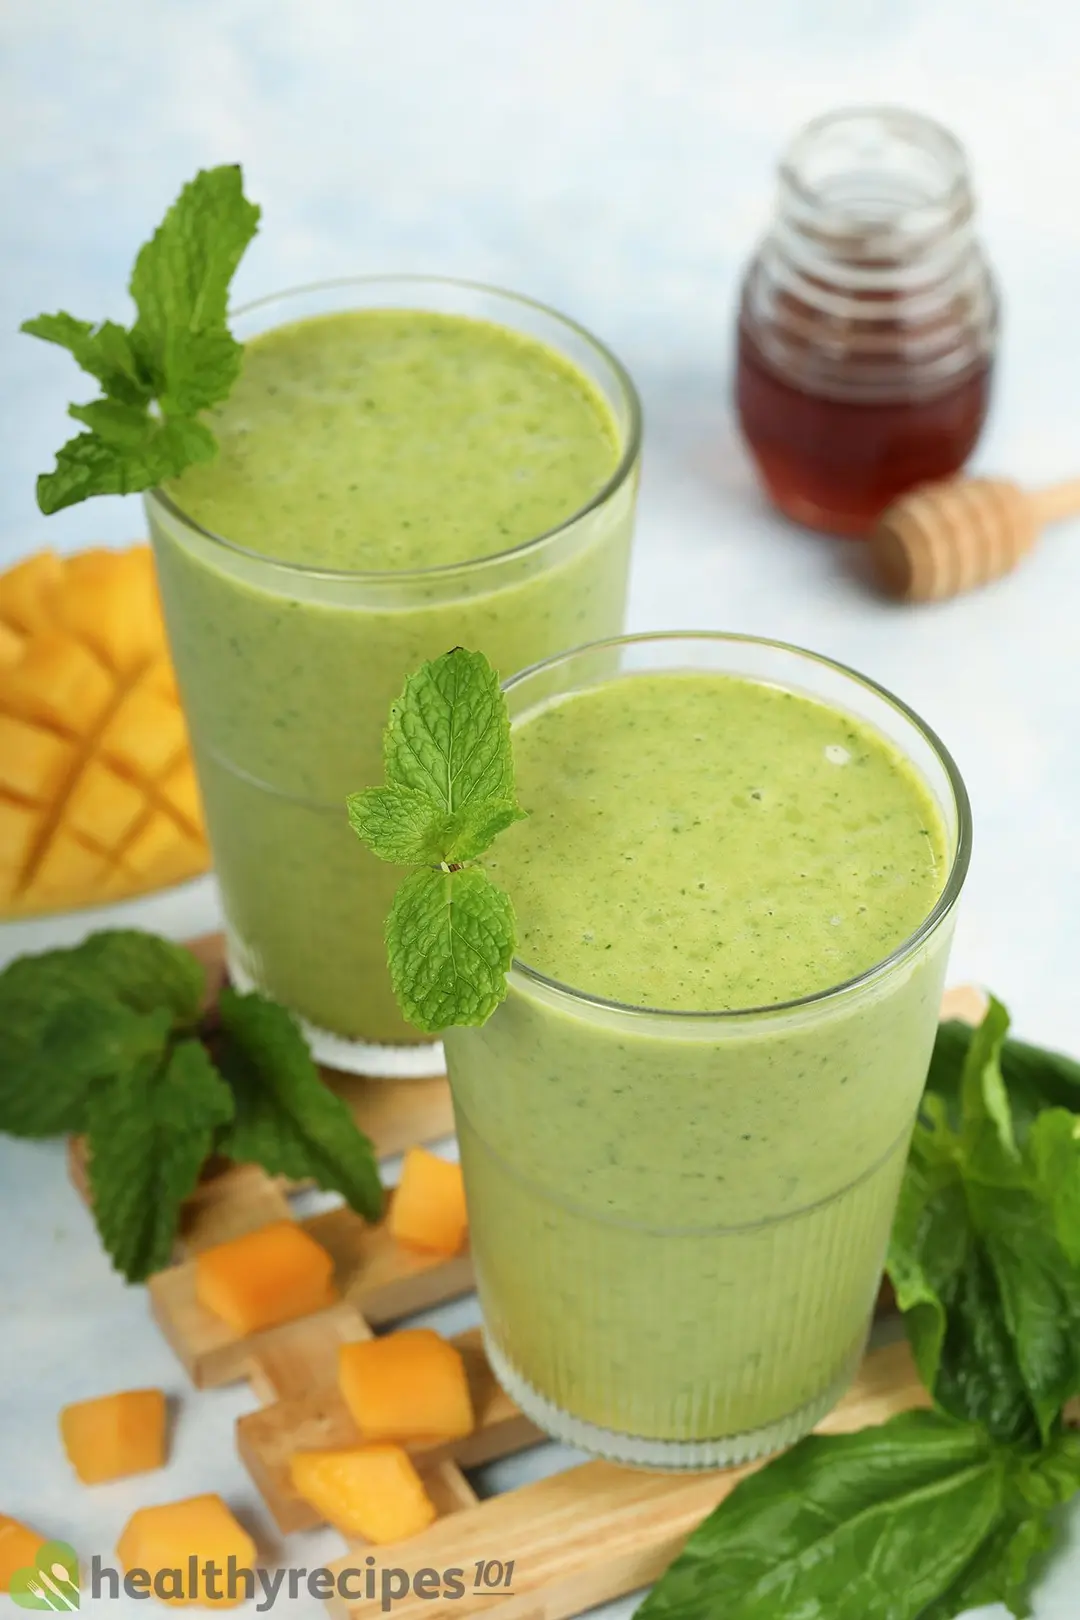 Mango Spinach Smoothie Recipe: An Easy, Healthy, and Tasty Drink